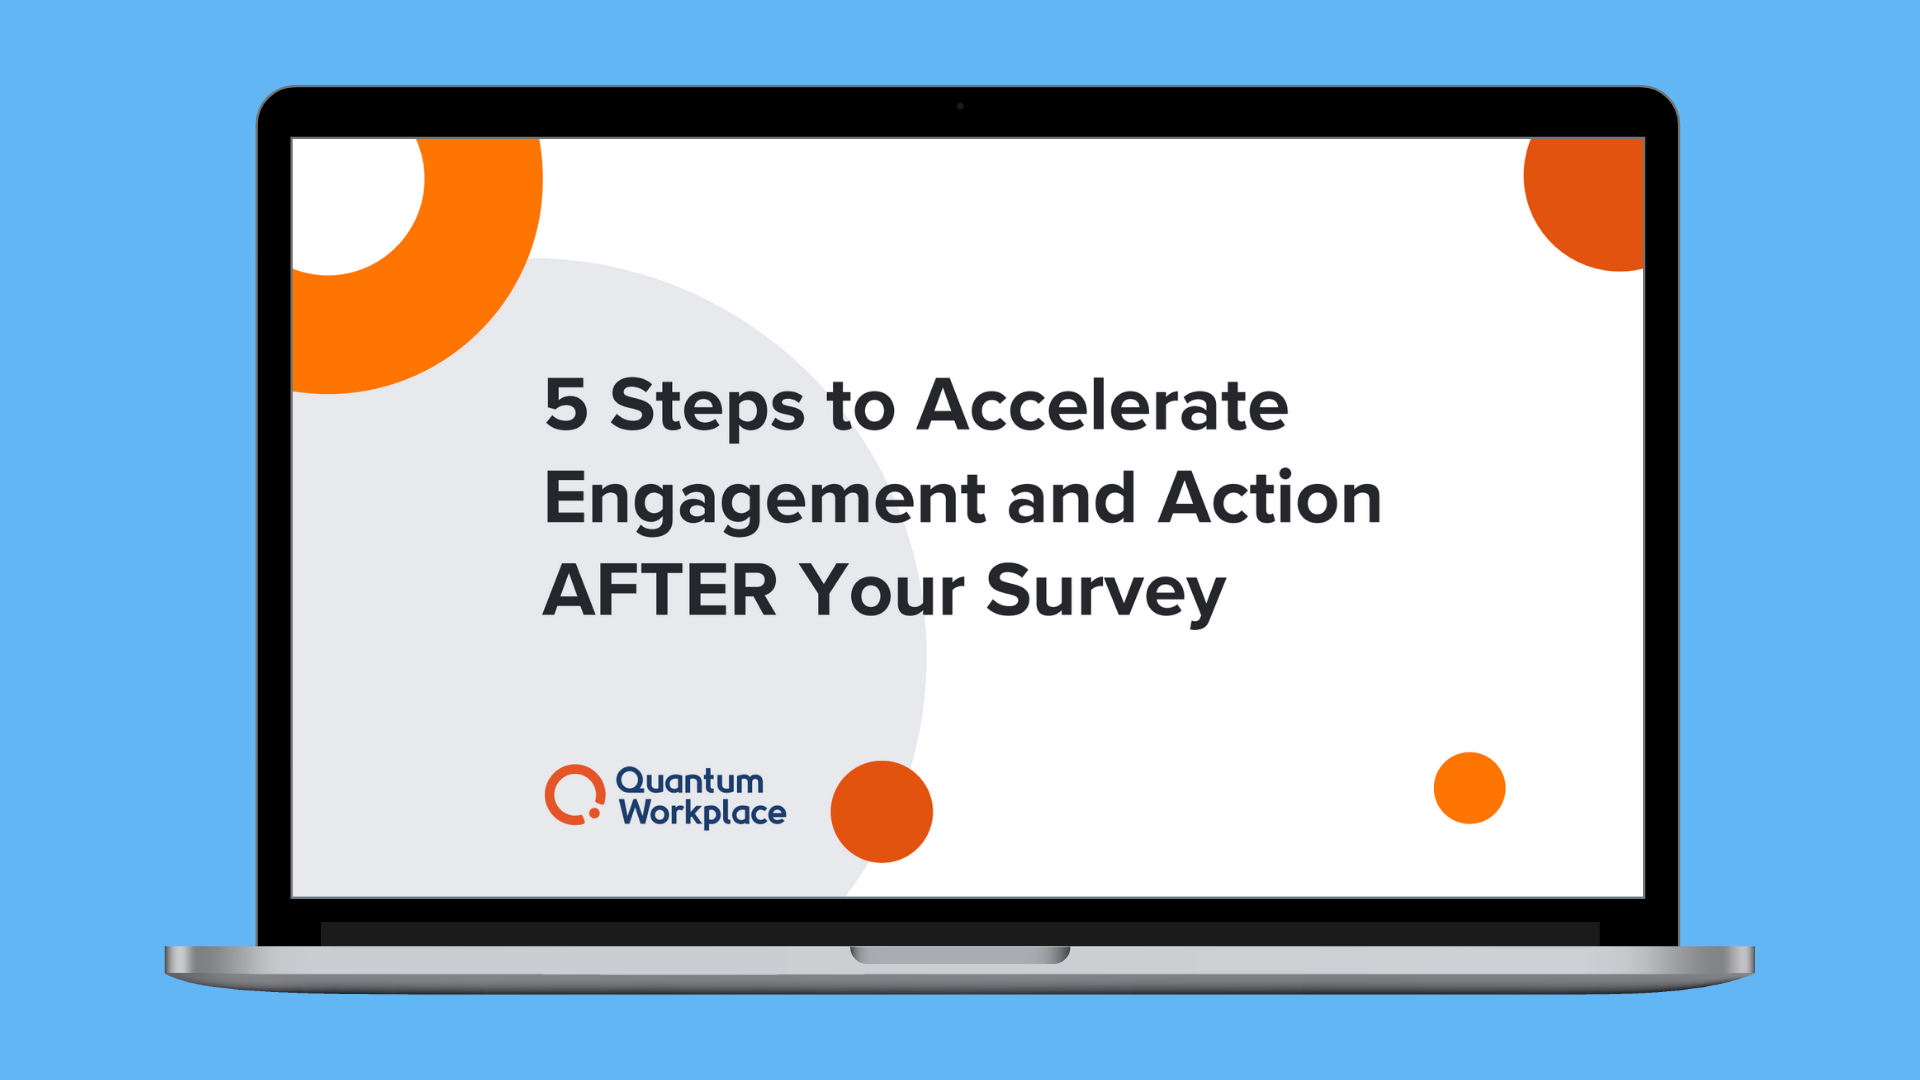 5 Steps to Accelerate Engagement and Action AFTER Your Survey